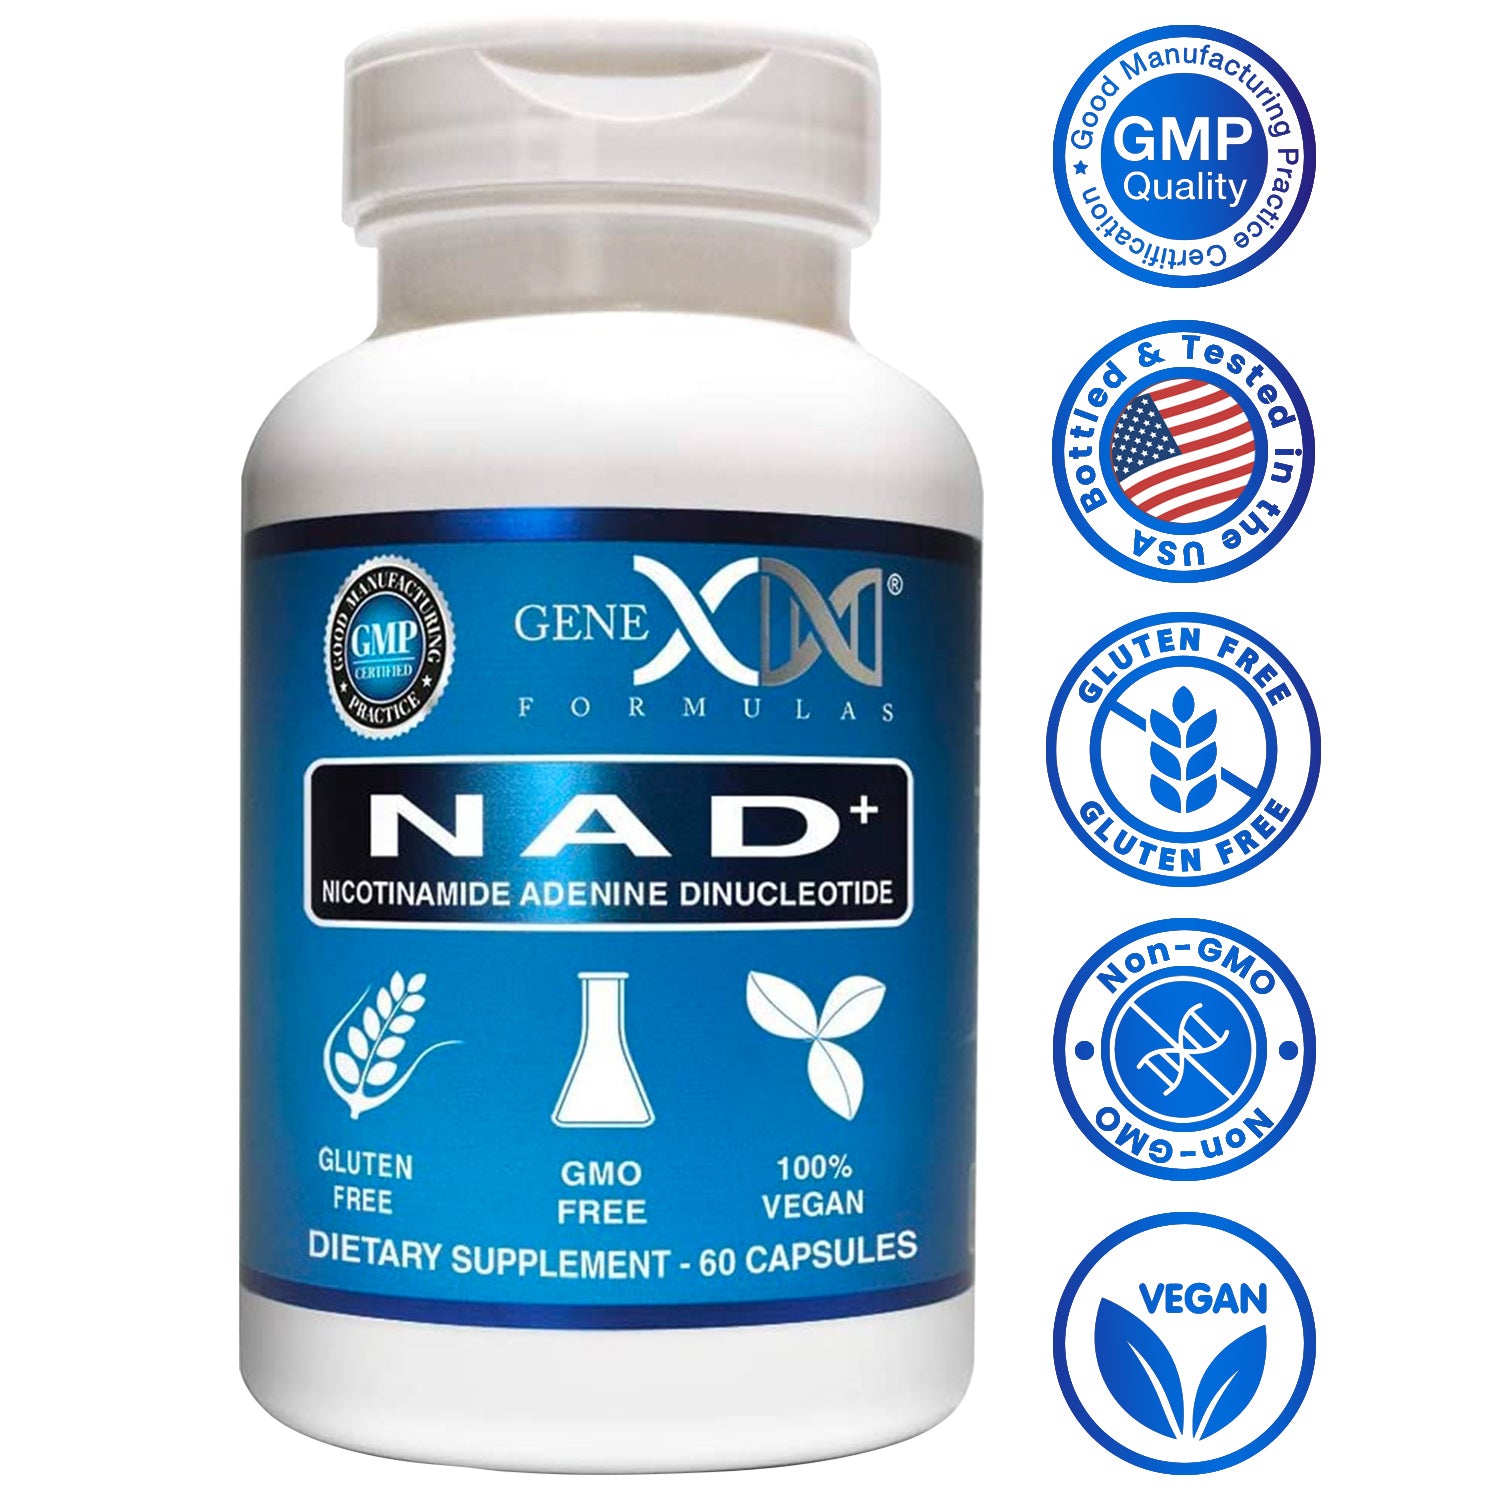 Bottle of Genex Nicotinamide Adenine Dinucleotide with icons that state "GMP certified facility, Bottled & tested in the USA, gluten free, Non-GMO, Vegan" 